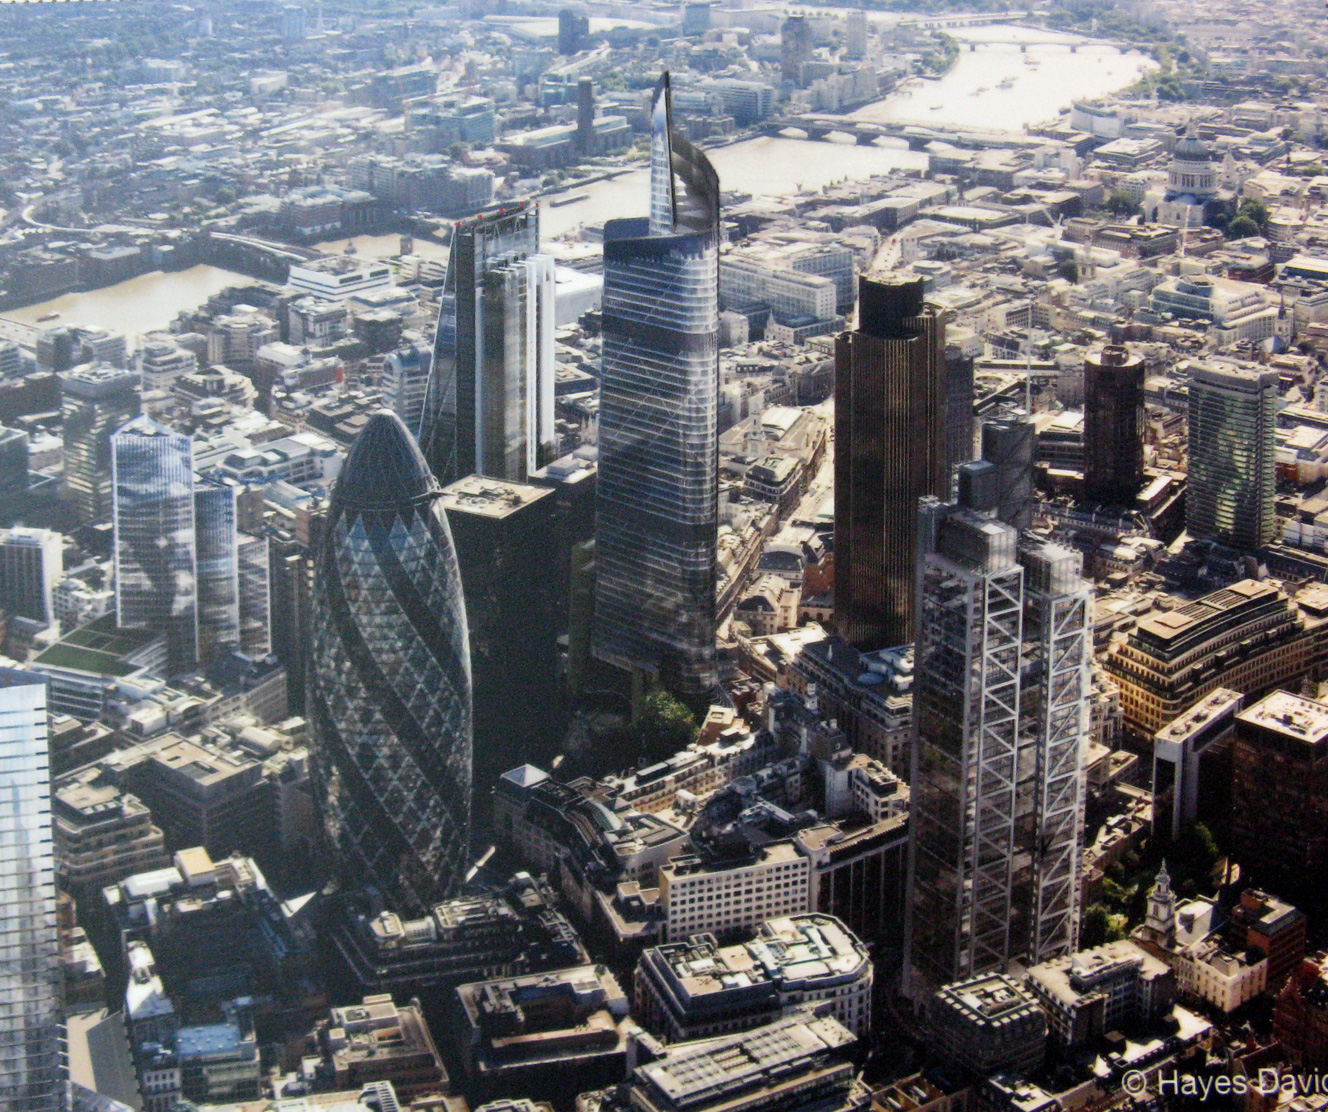 London May Finish Its Half-Built, Five-Year-Old Skyscraper After All